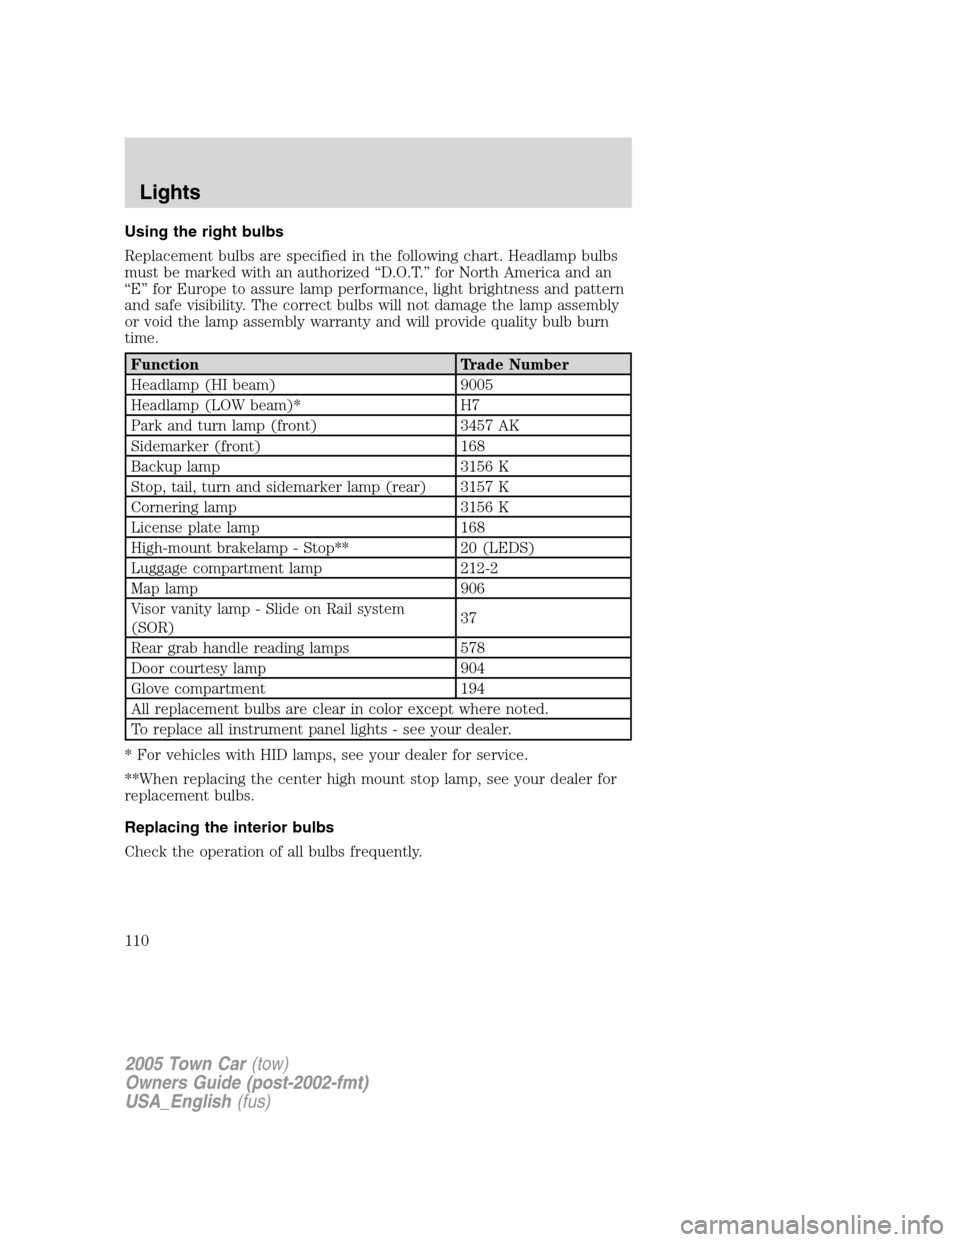 LINCOLN TOWN CAR 2005  Owners Manual Using the right bulbs
Replacement bulbs are specified in the following chart. Headlamp bulbs
must be marked with an authorized “D.O.T.” for North America and an
“E” for Europe to assure lamp p